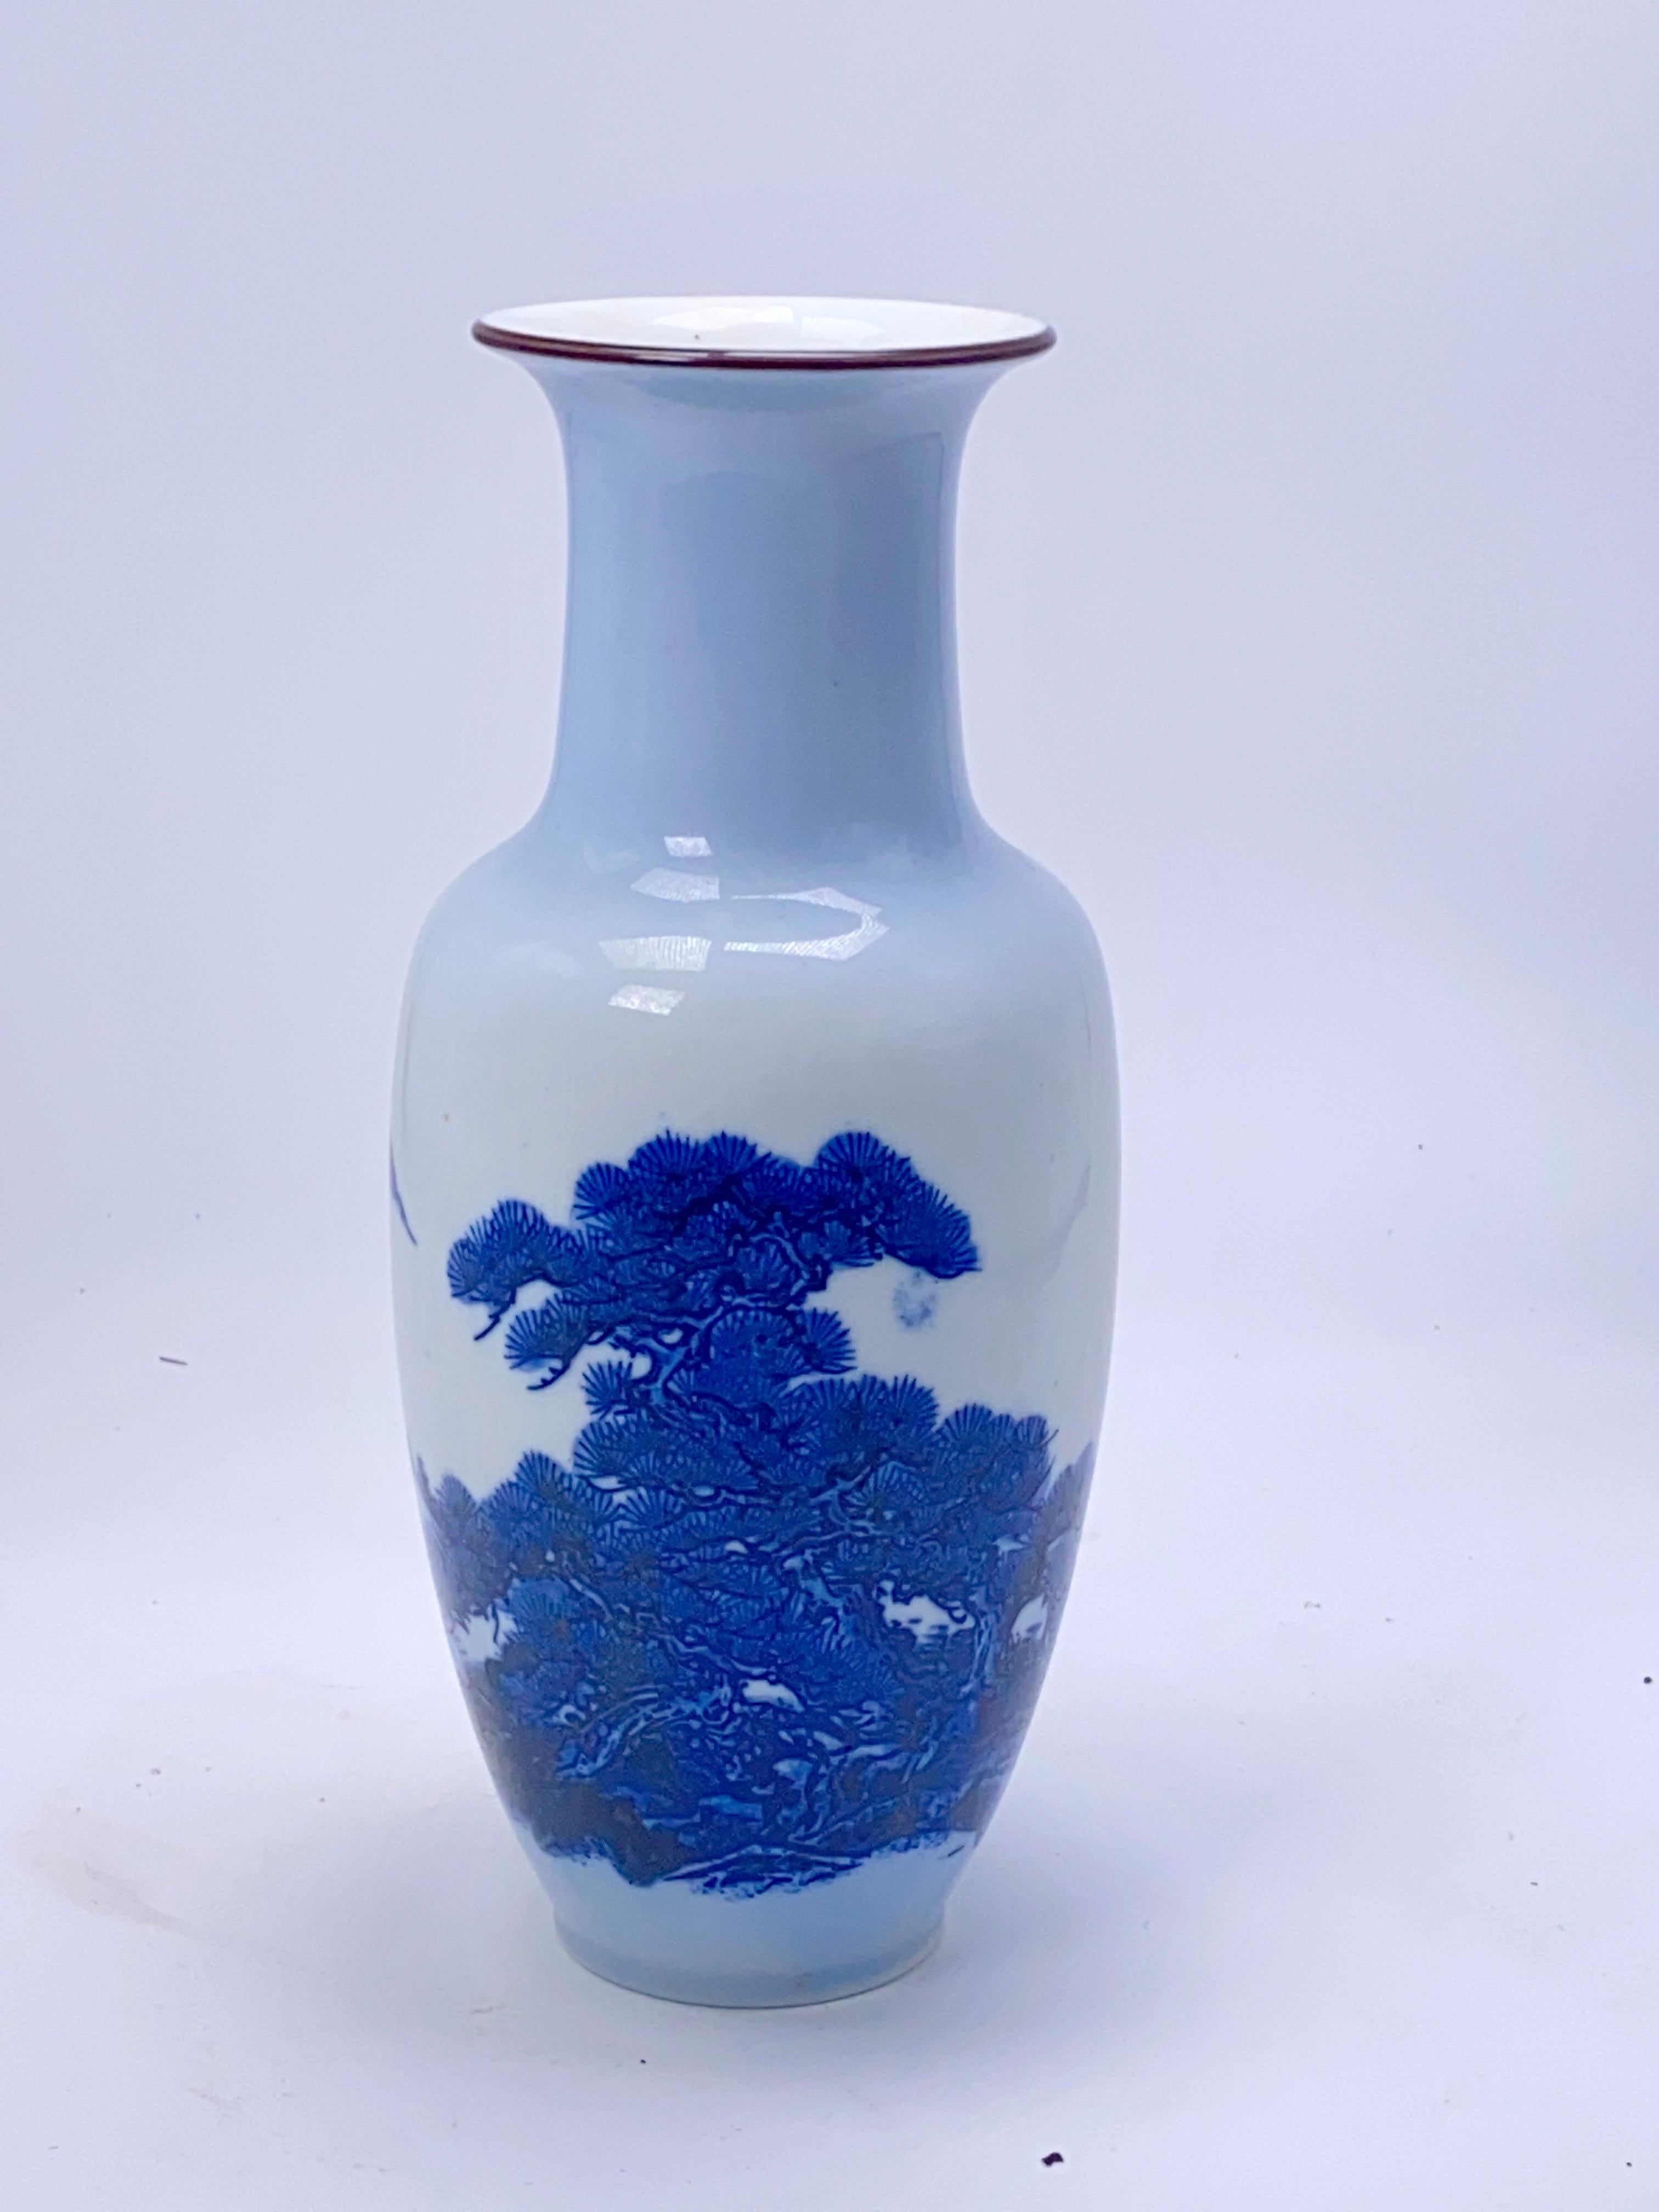 20th century Chinese blue and white vase features fishes pattern, cobalt blue on a Classic shape formed from pure white Kaolin clay. Such examples were produced in China for the lucrative European and Middle Eastern market, and continue to be